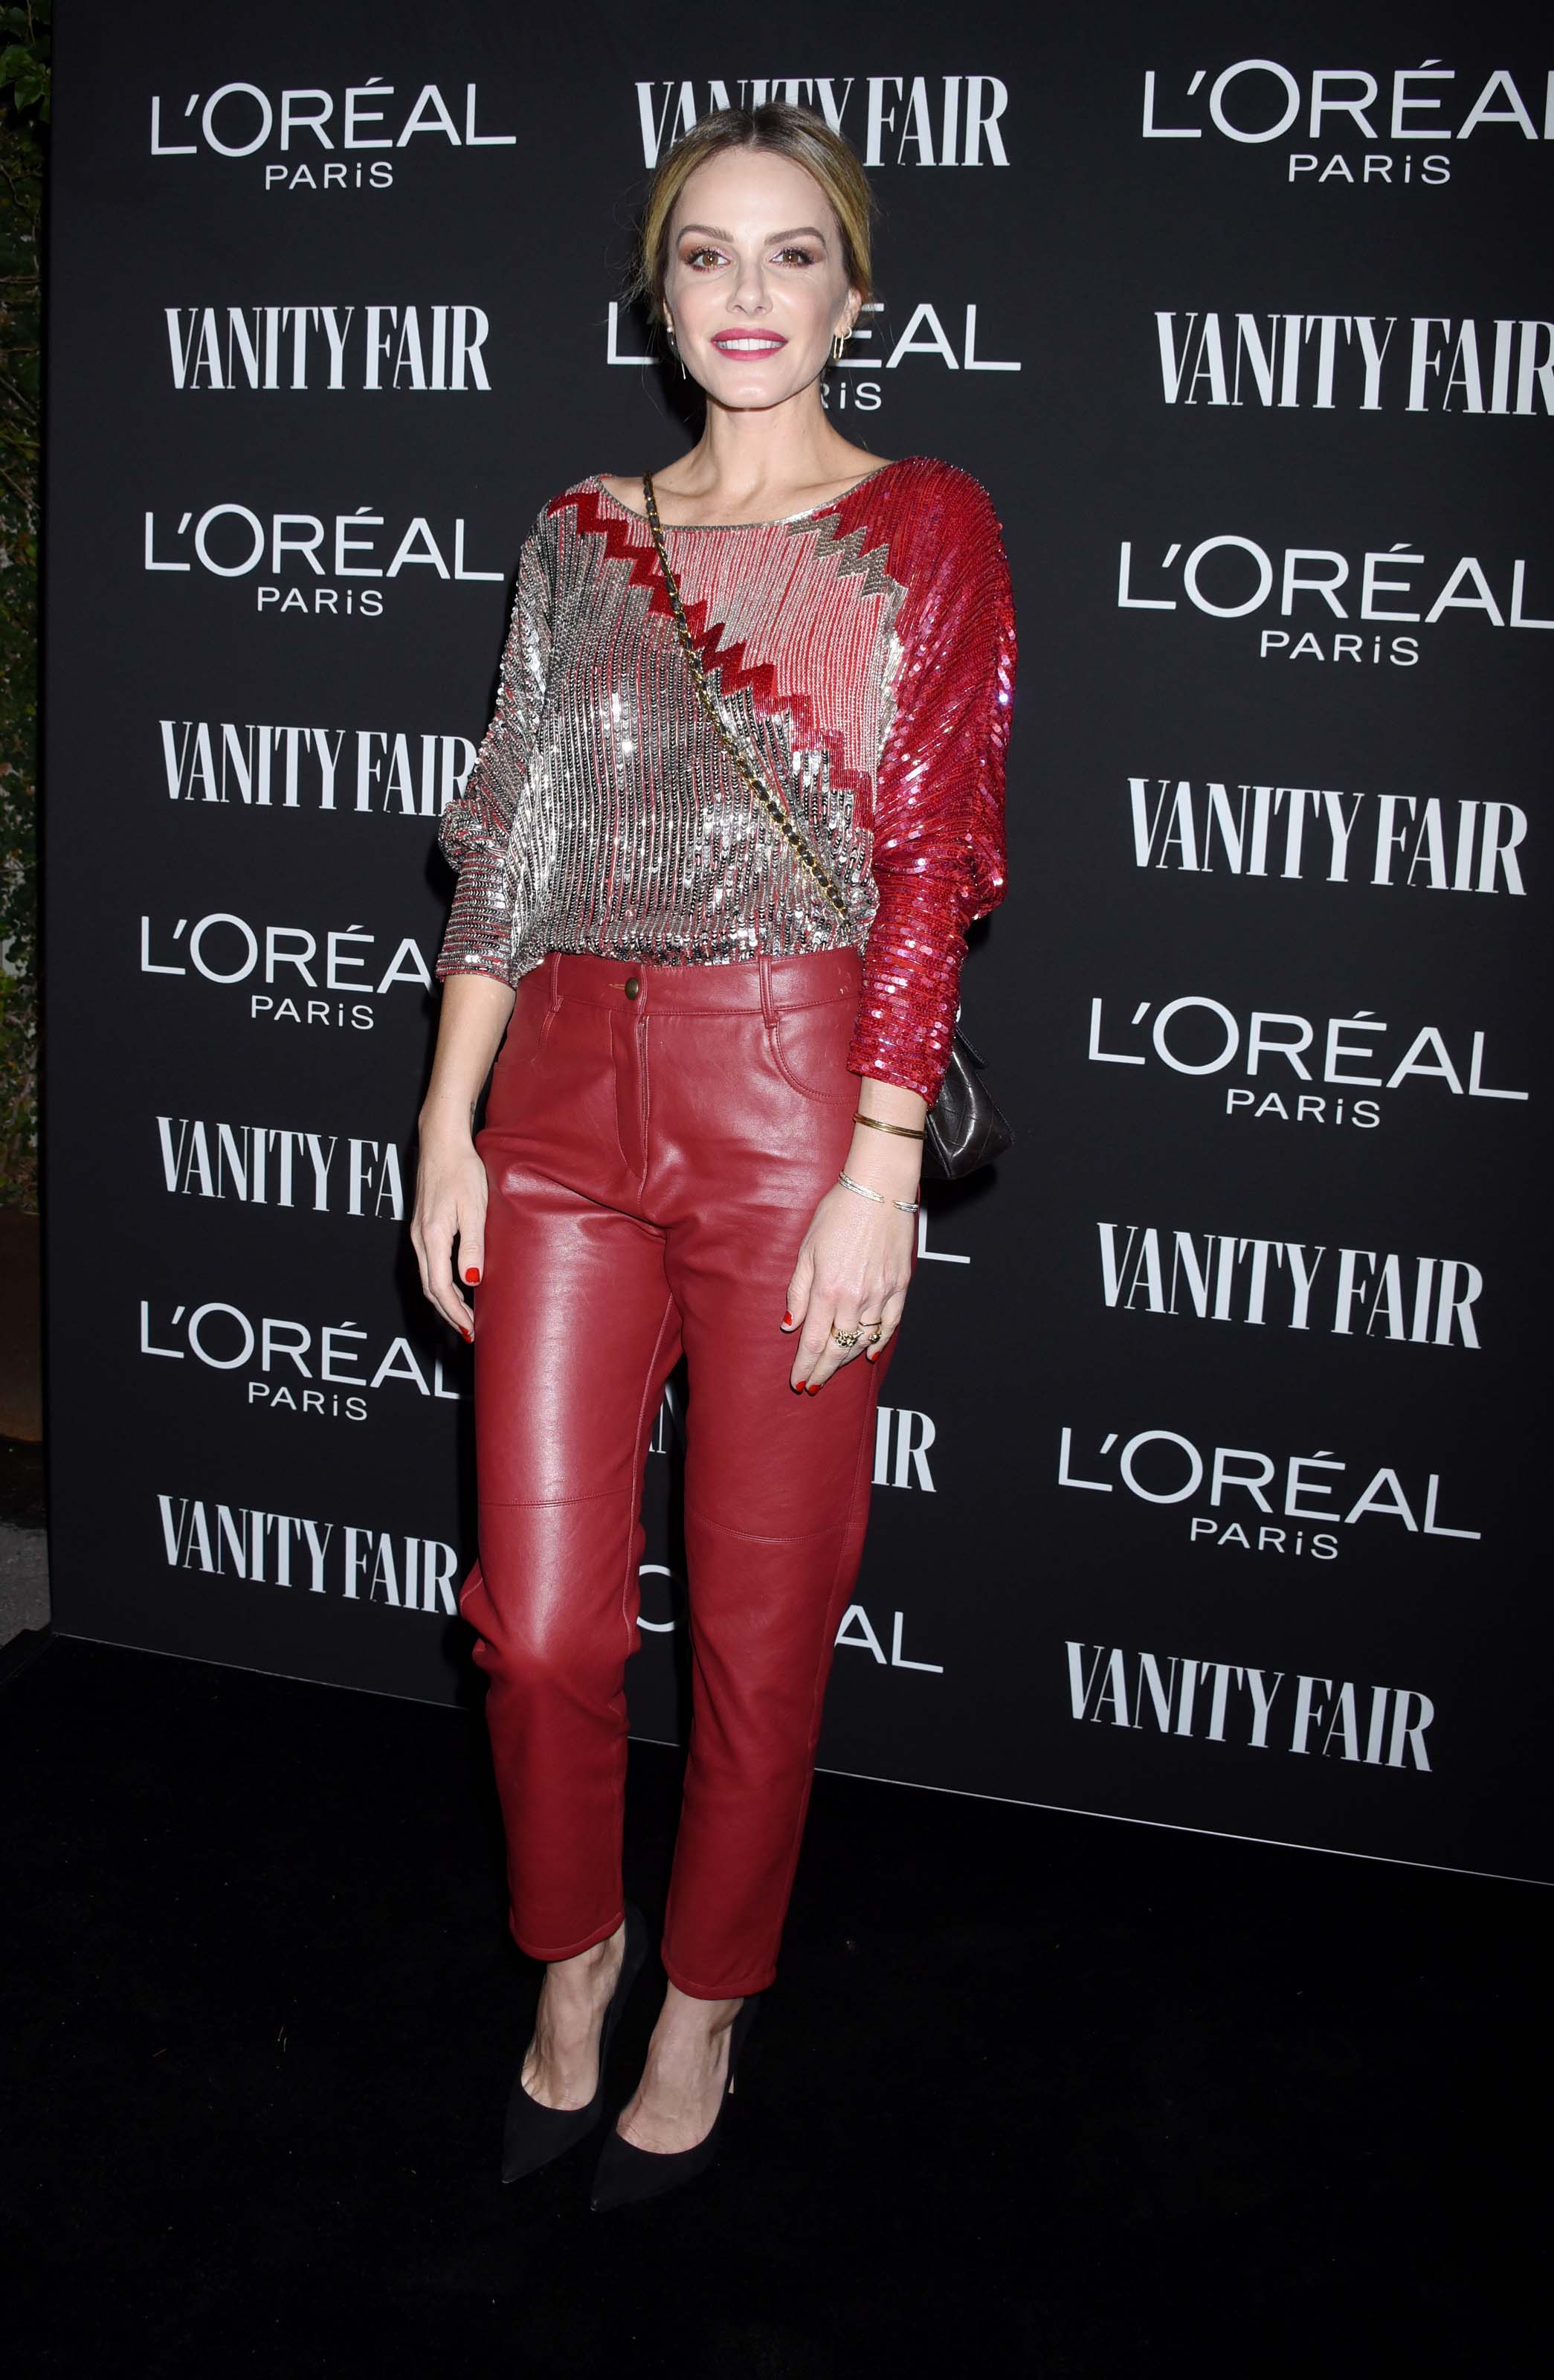 Monet Mazur attends Vanity Fair and L’Oreal Paris’ New Hollywood Party